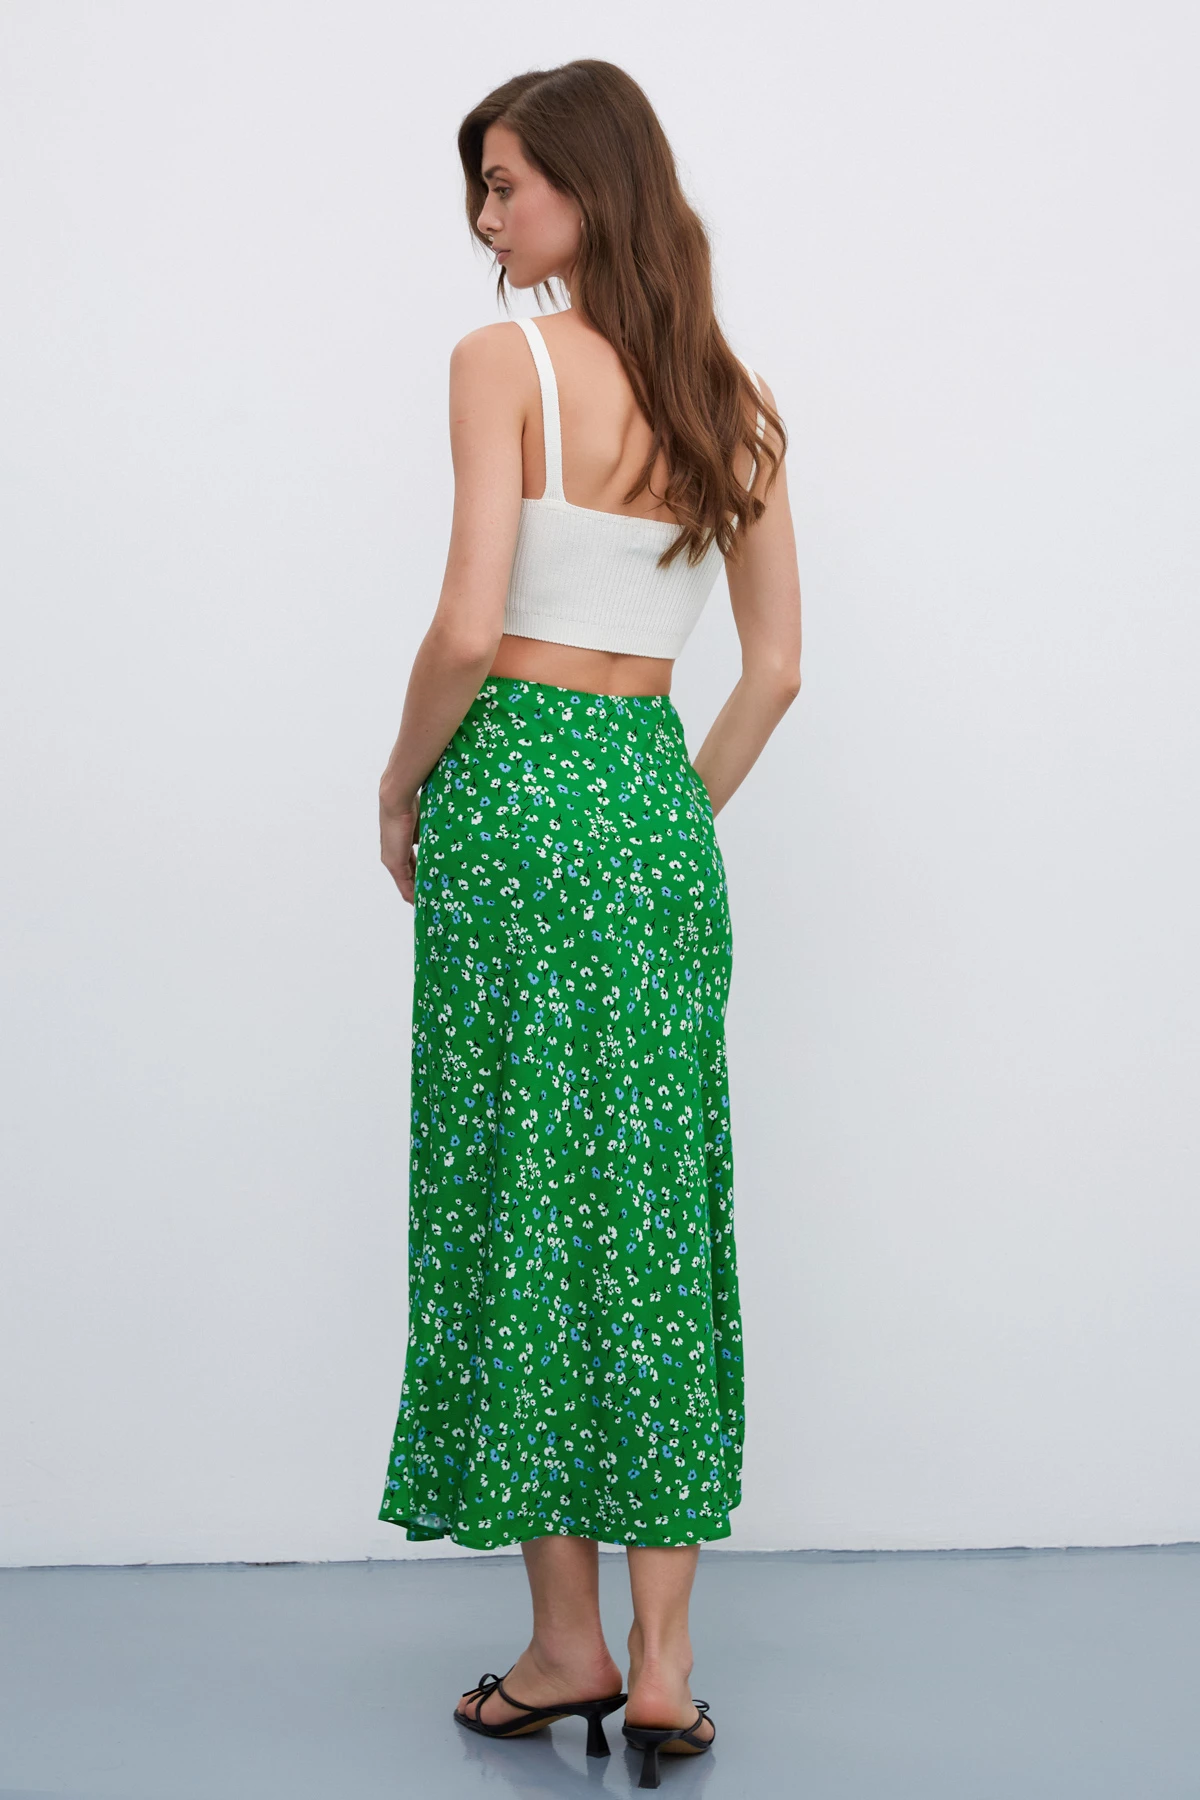 Green midi skirt in a floral print made of viscose, photo 4